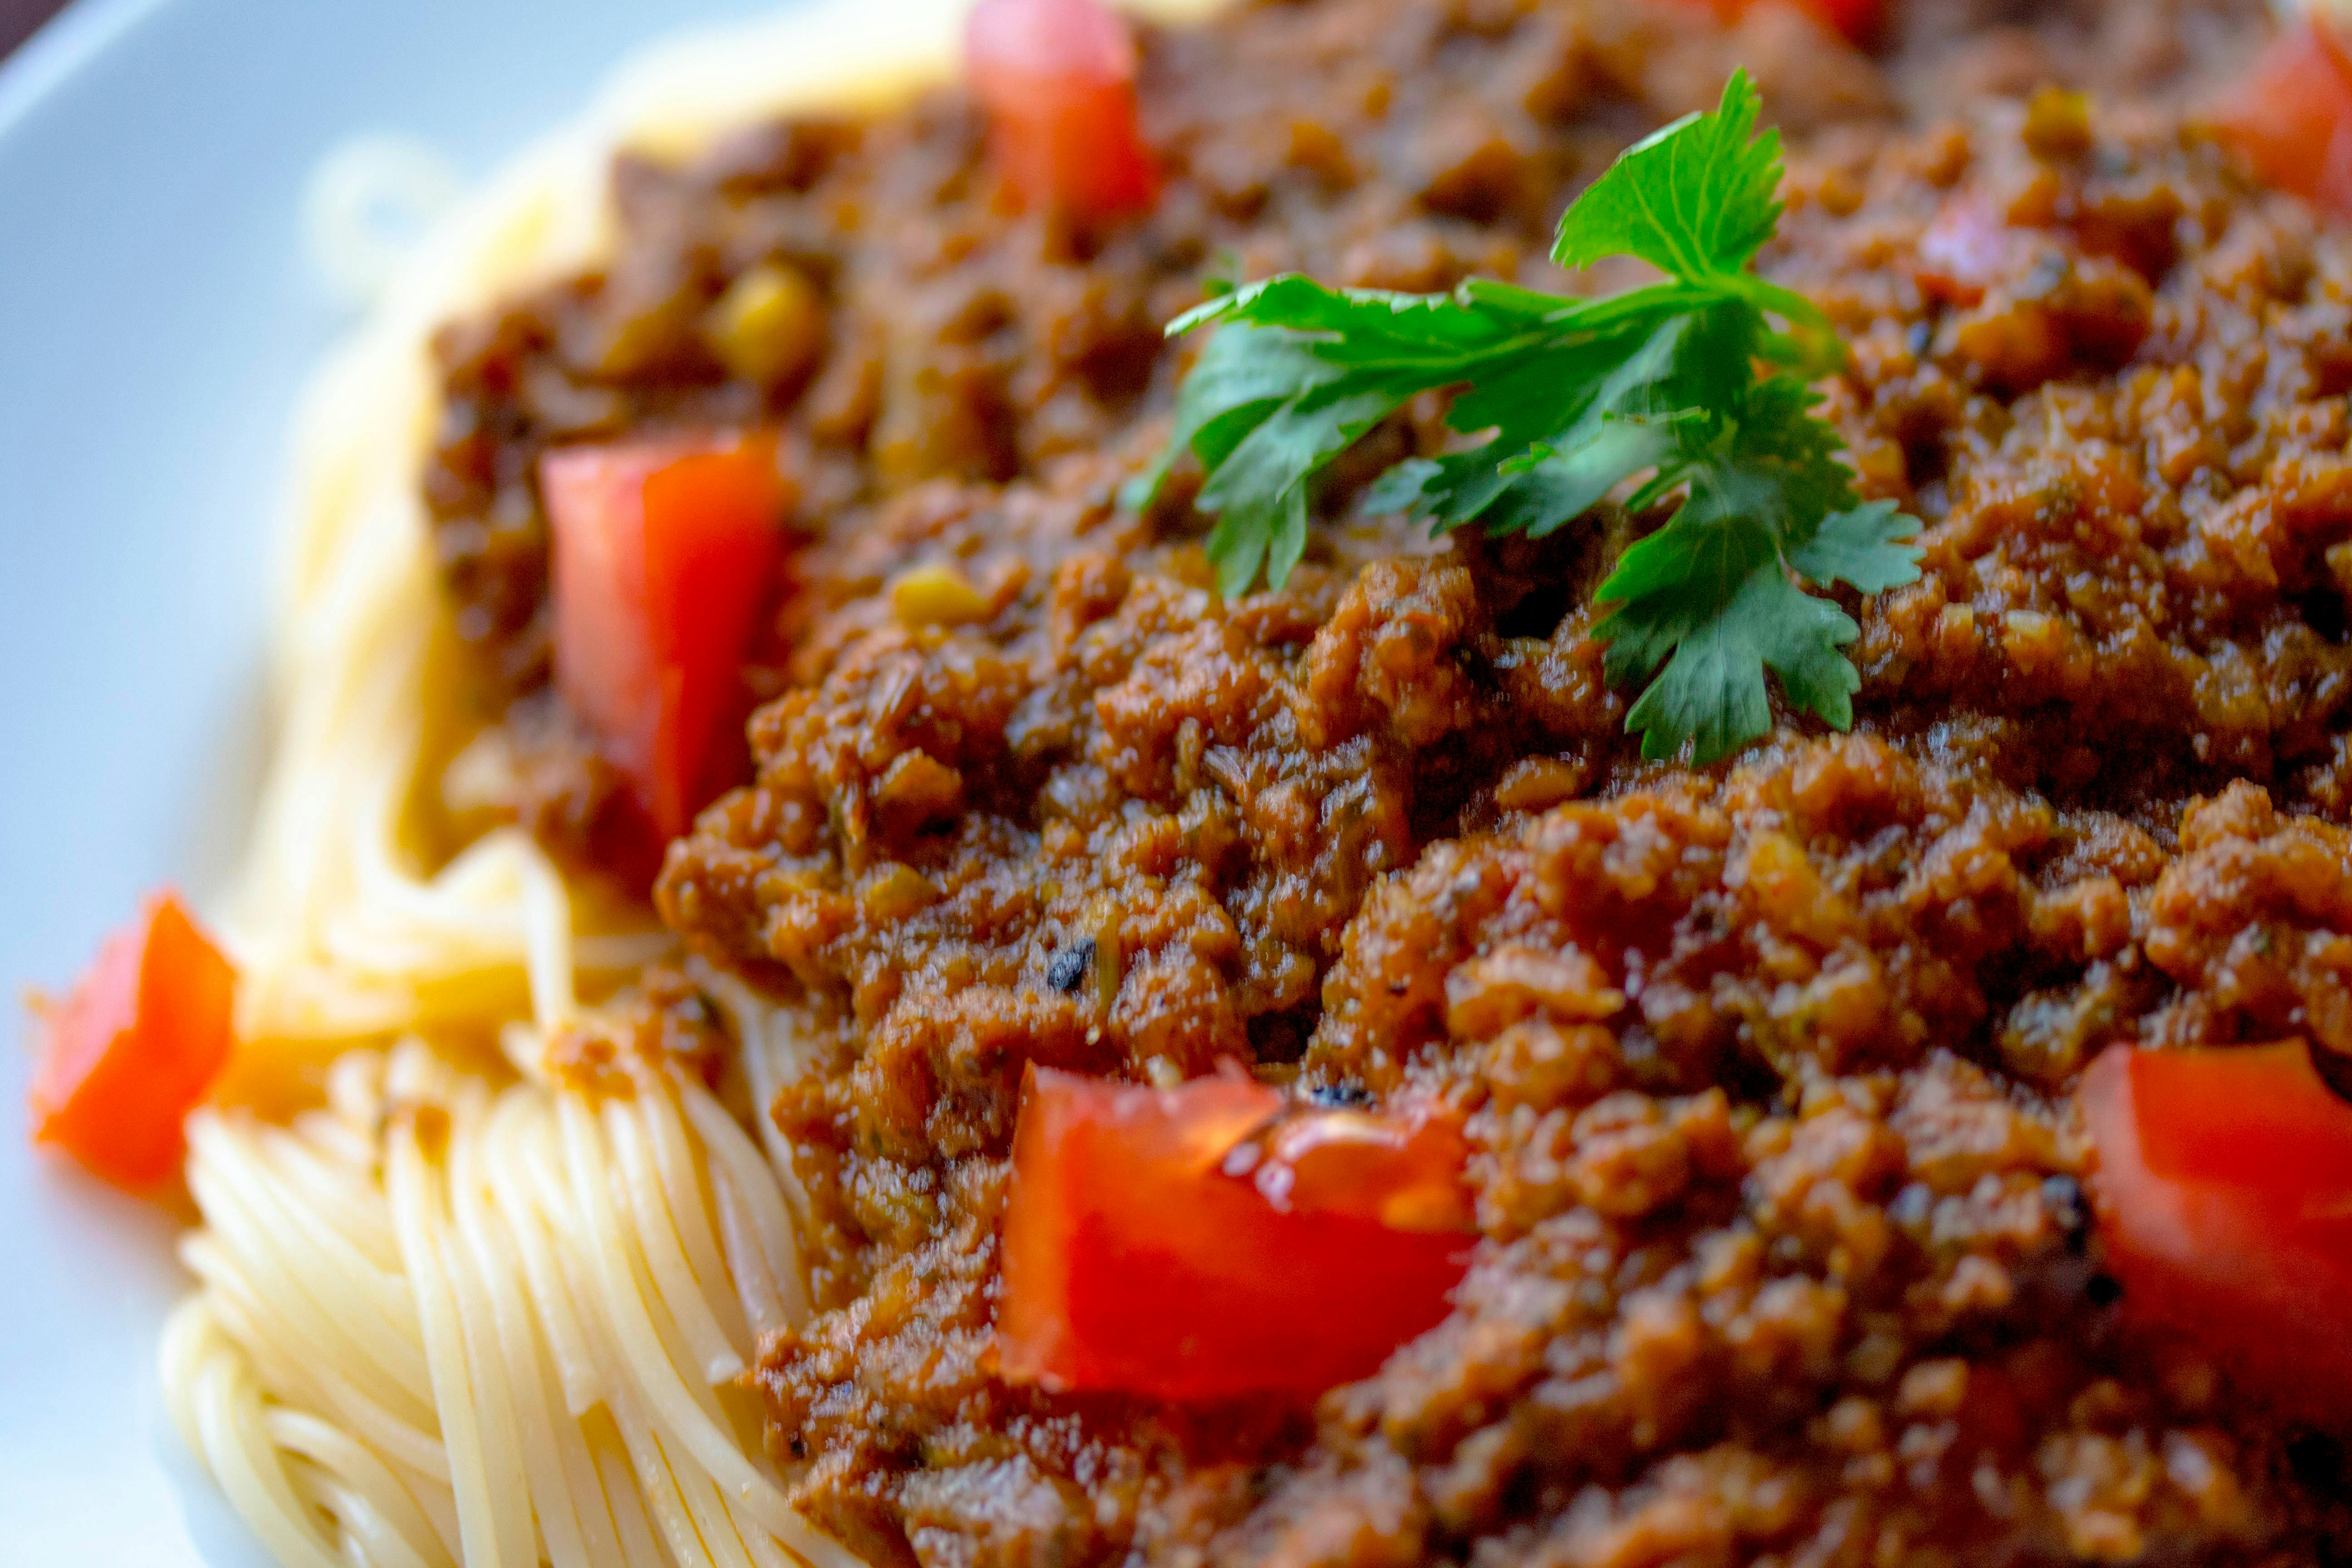 Spaghetti and meat sauce | Source: Pexels